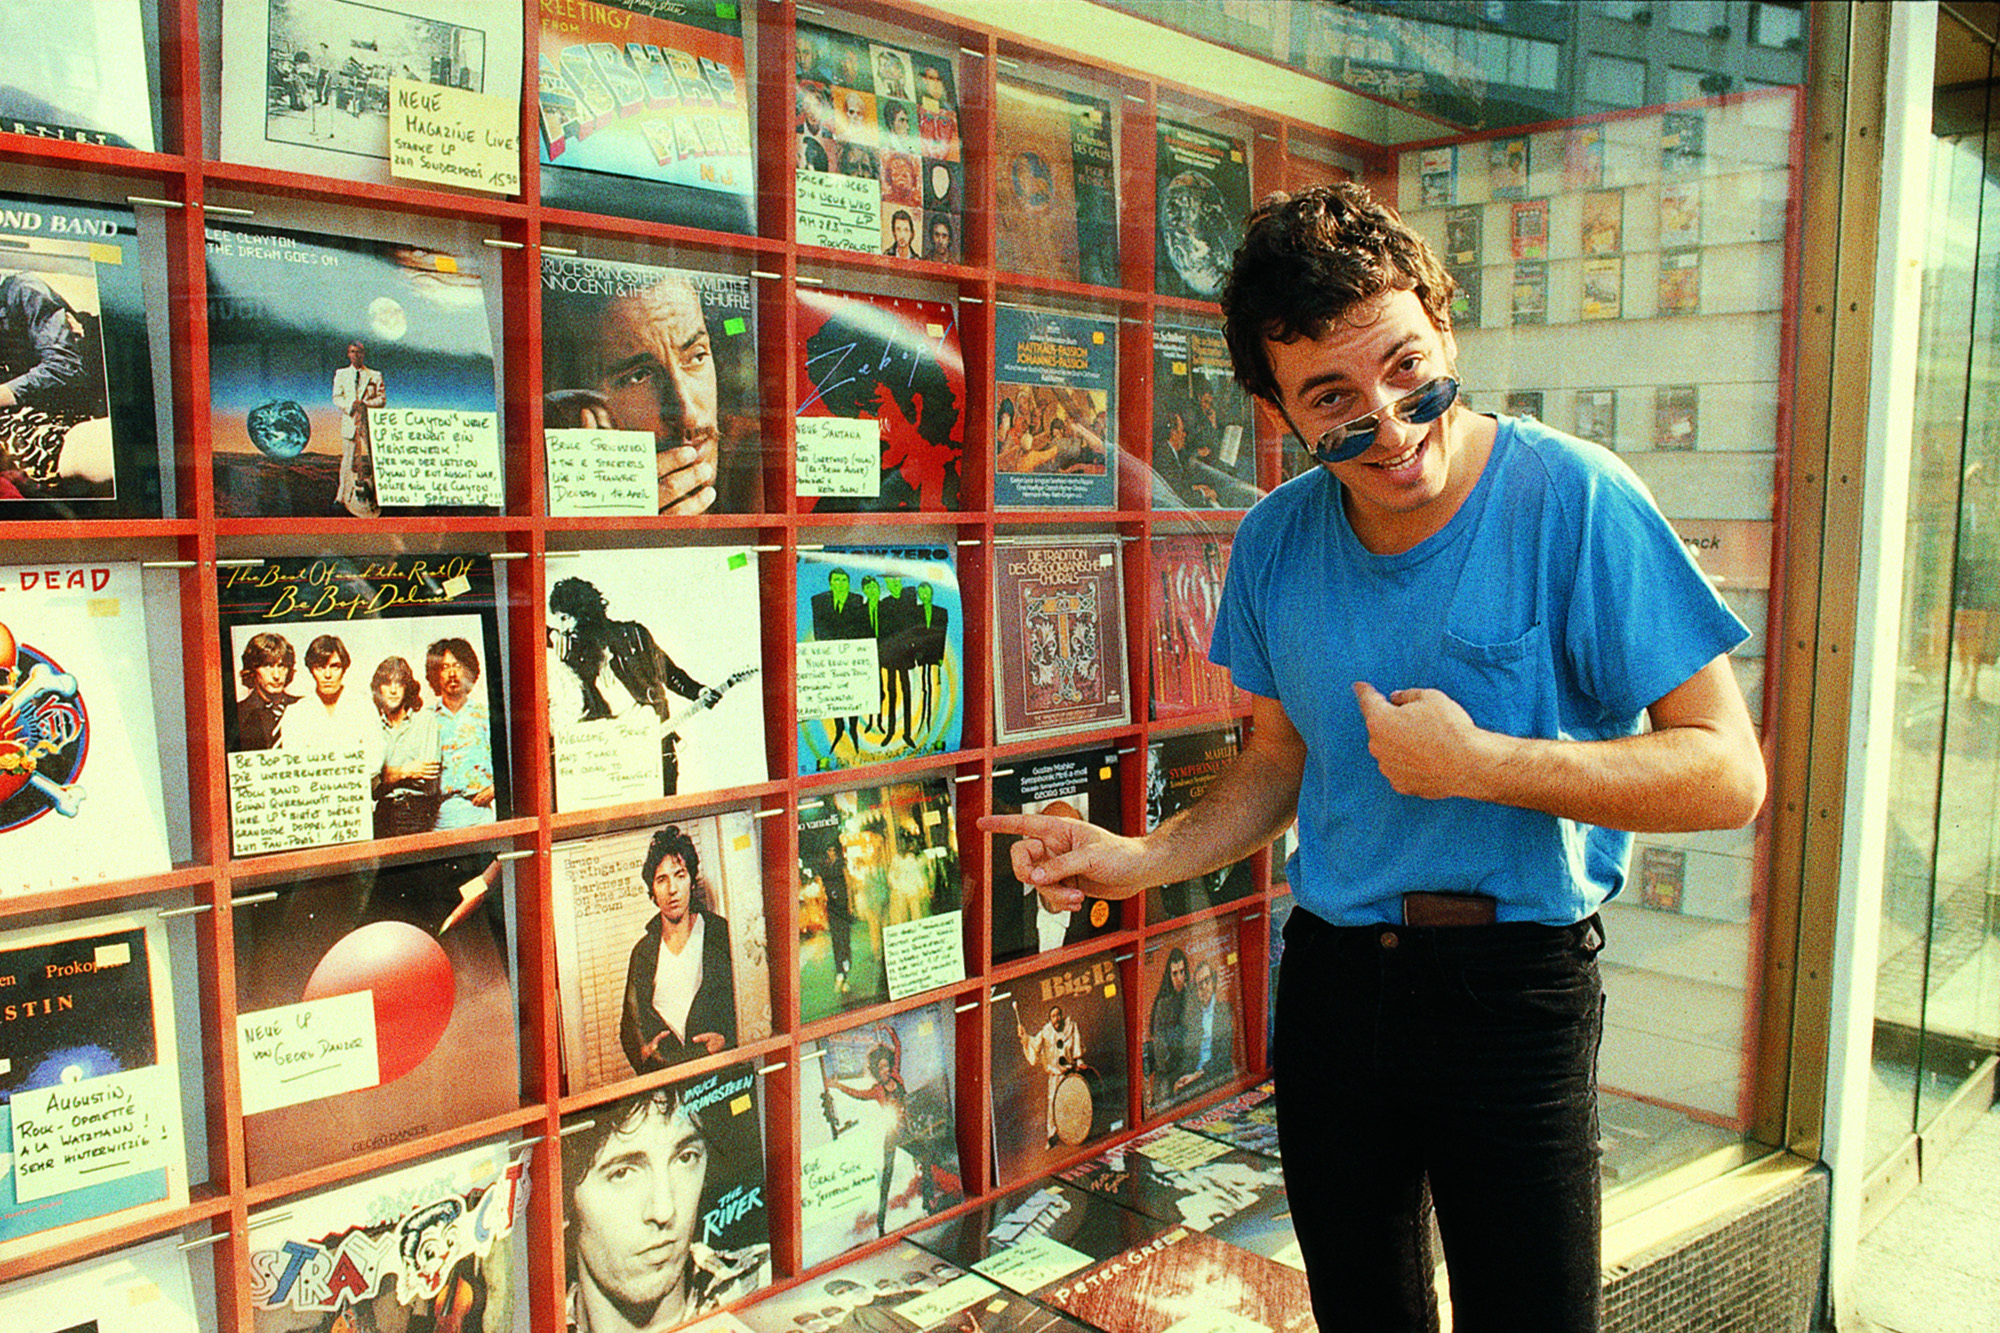 Jim Marchese: Bruce Springsteen - Record shop window, Lucerne, April 1981 - Snap Galleries